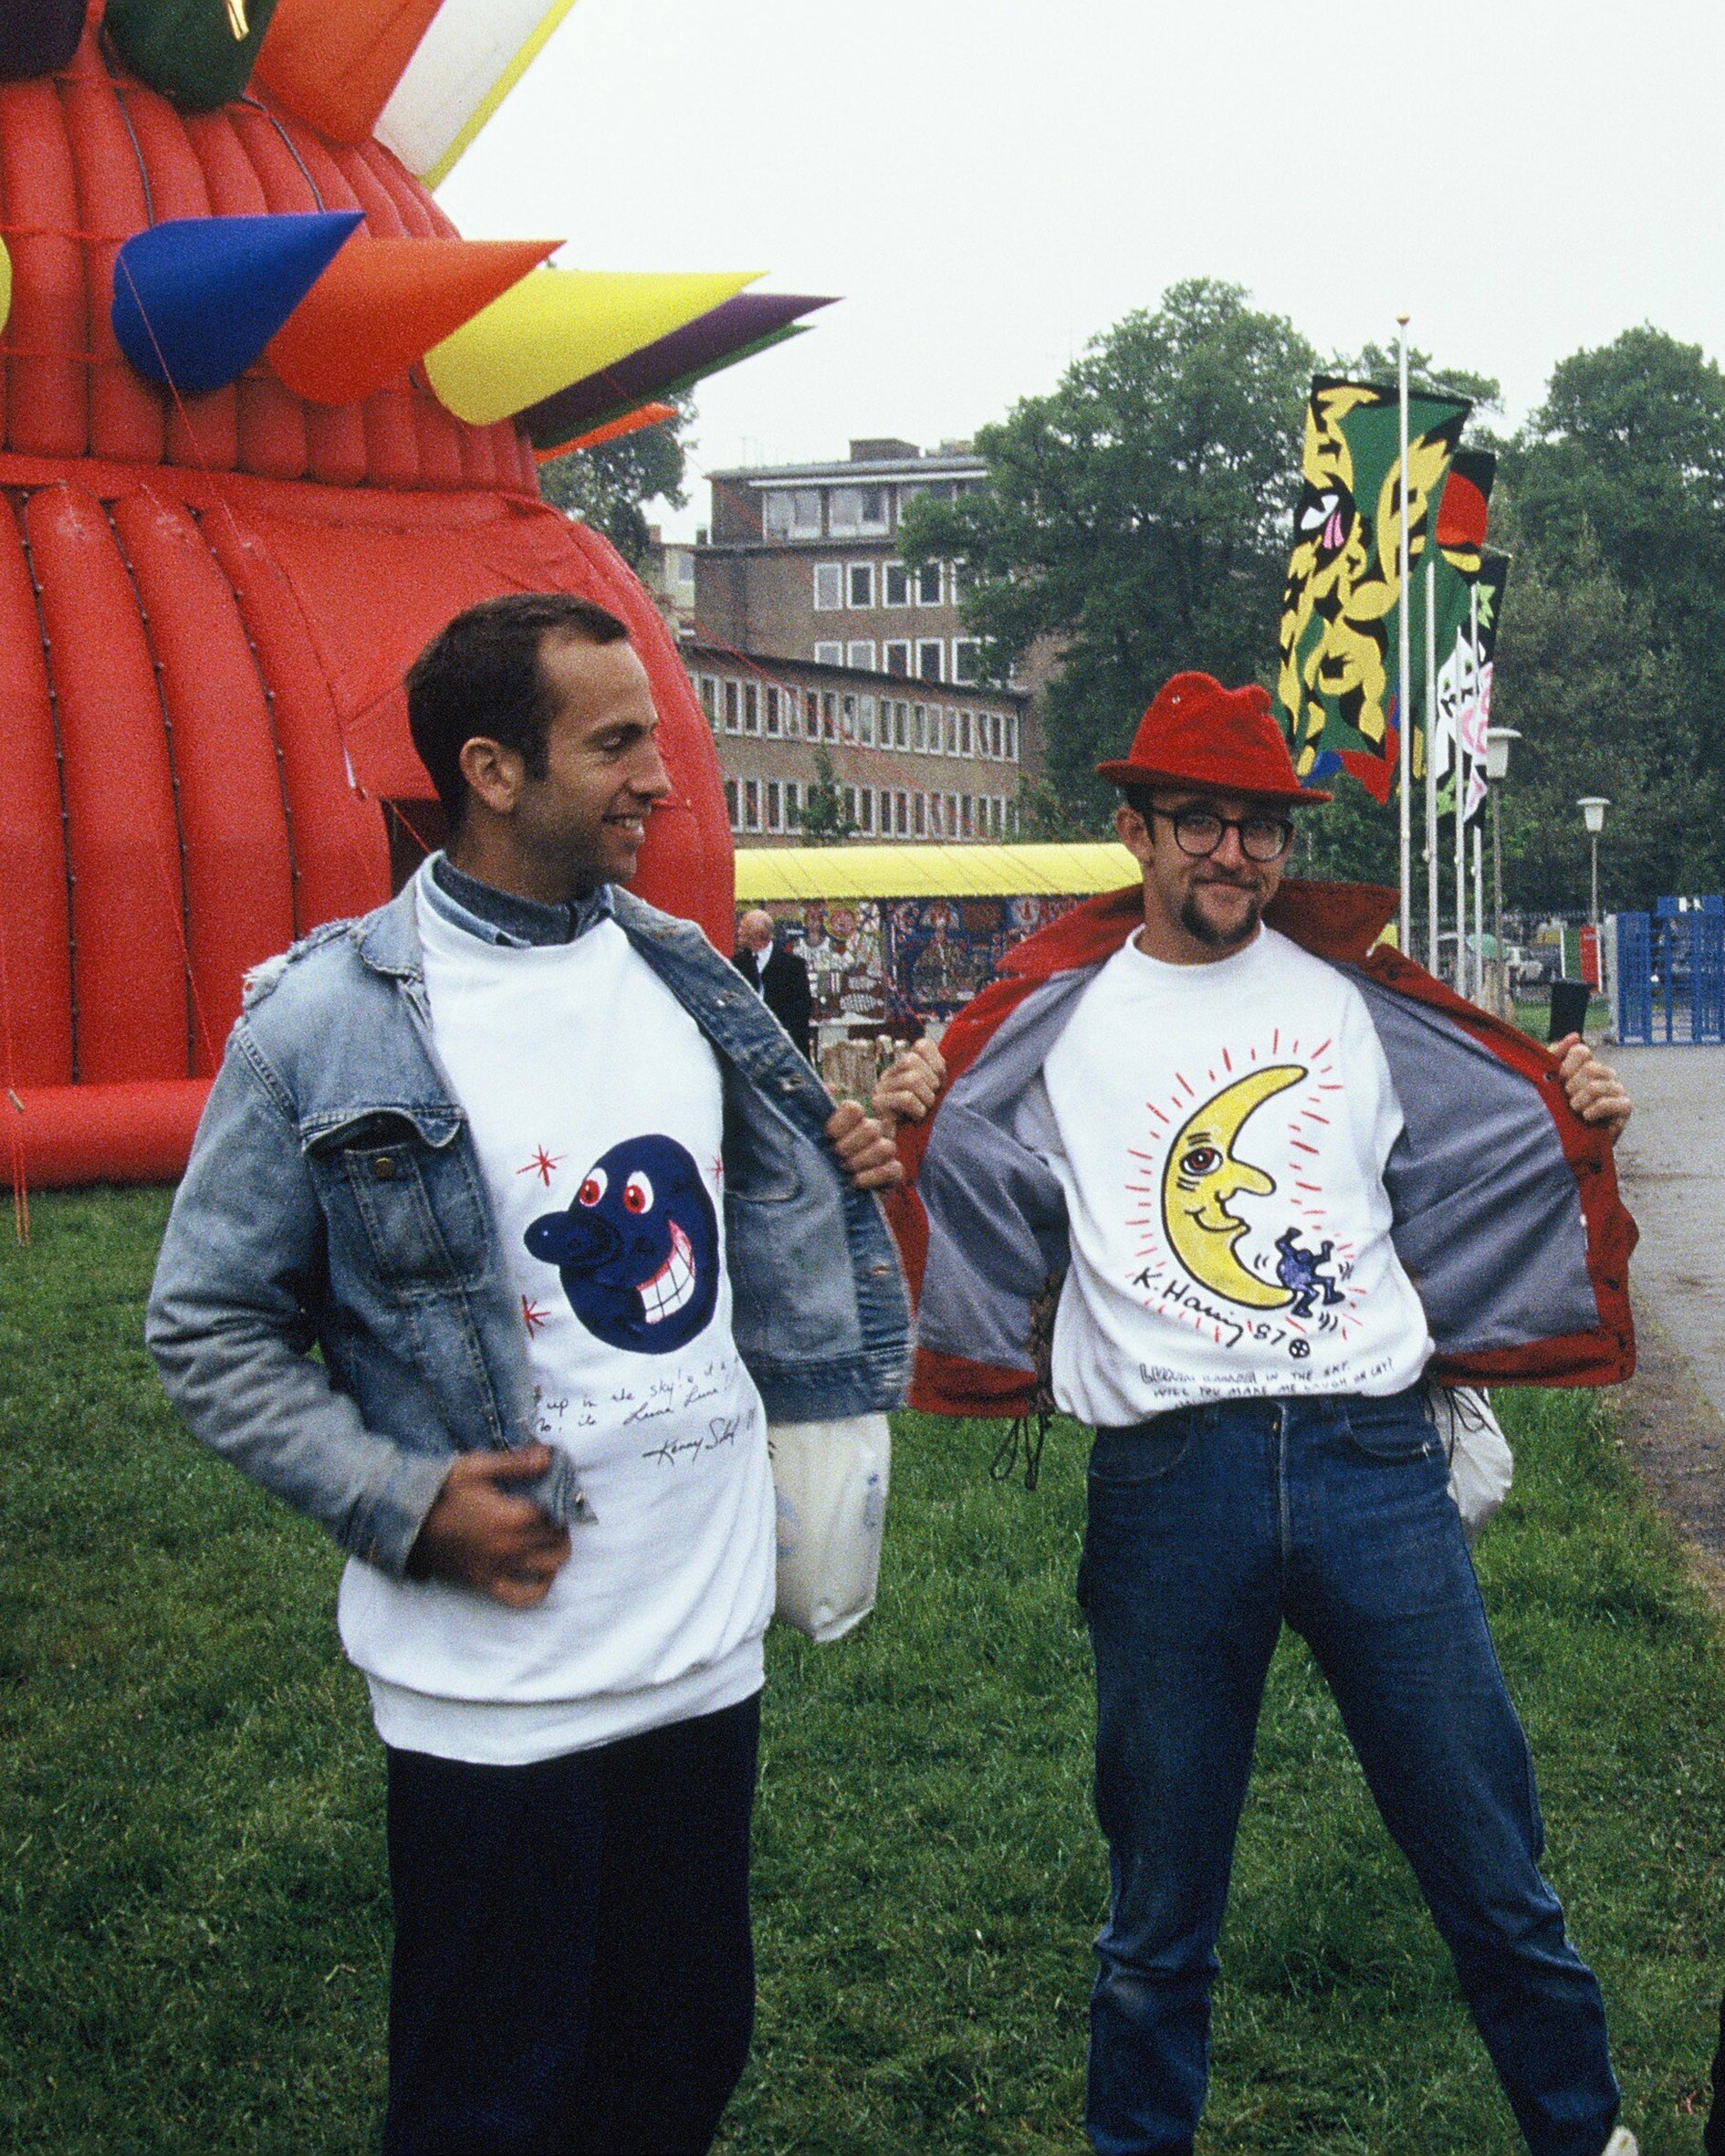 Archive photograph of Kenny Scarf and Keith Haring wearing the Archival Kenny Scharf Crewneck